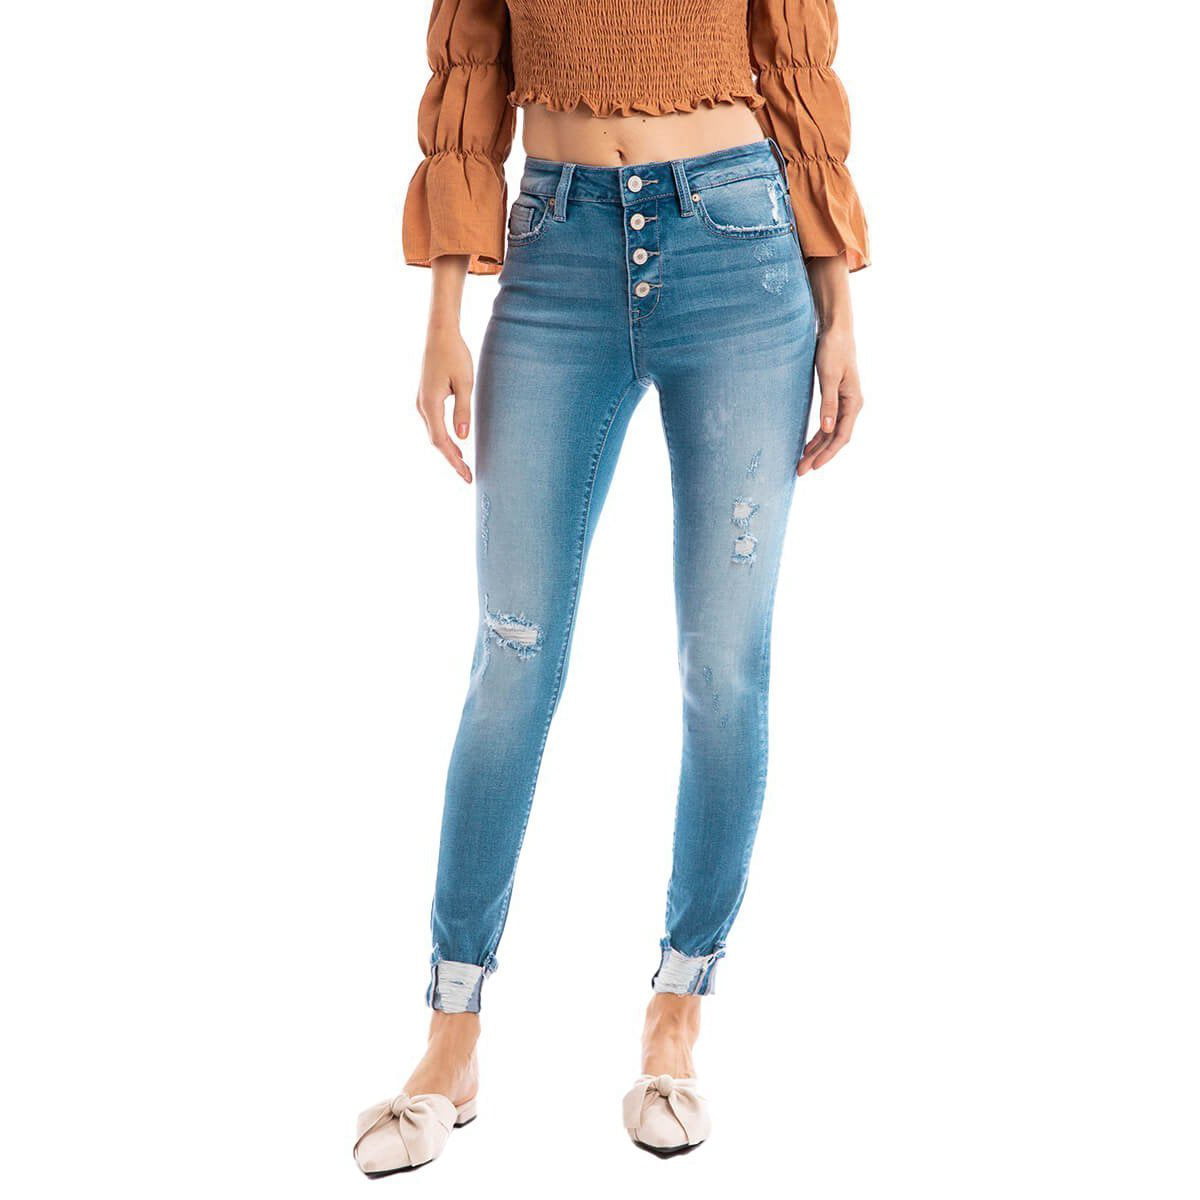 women's high rise button fly jeans